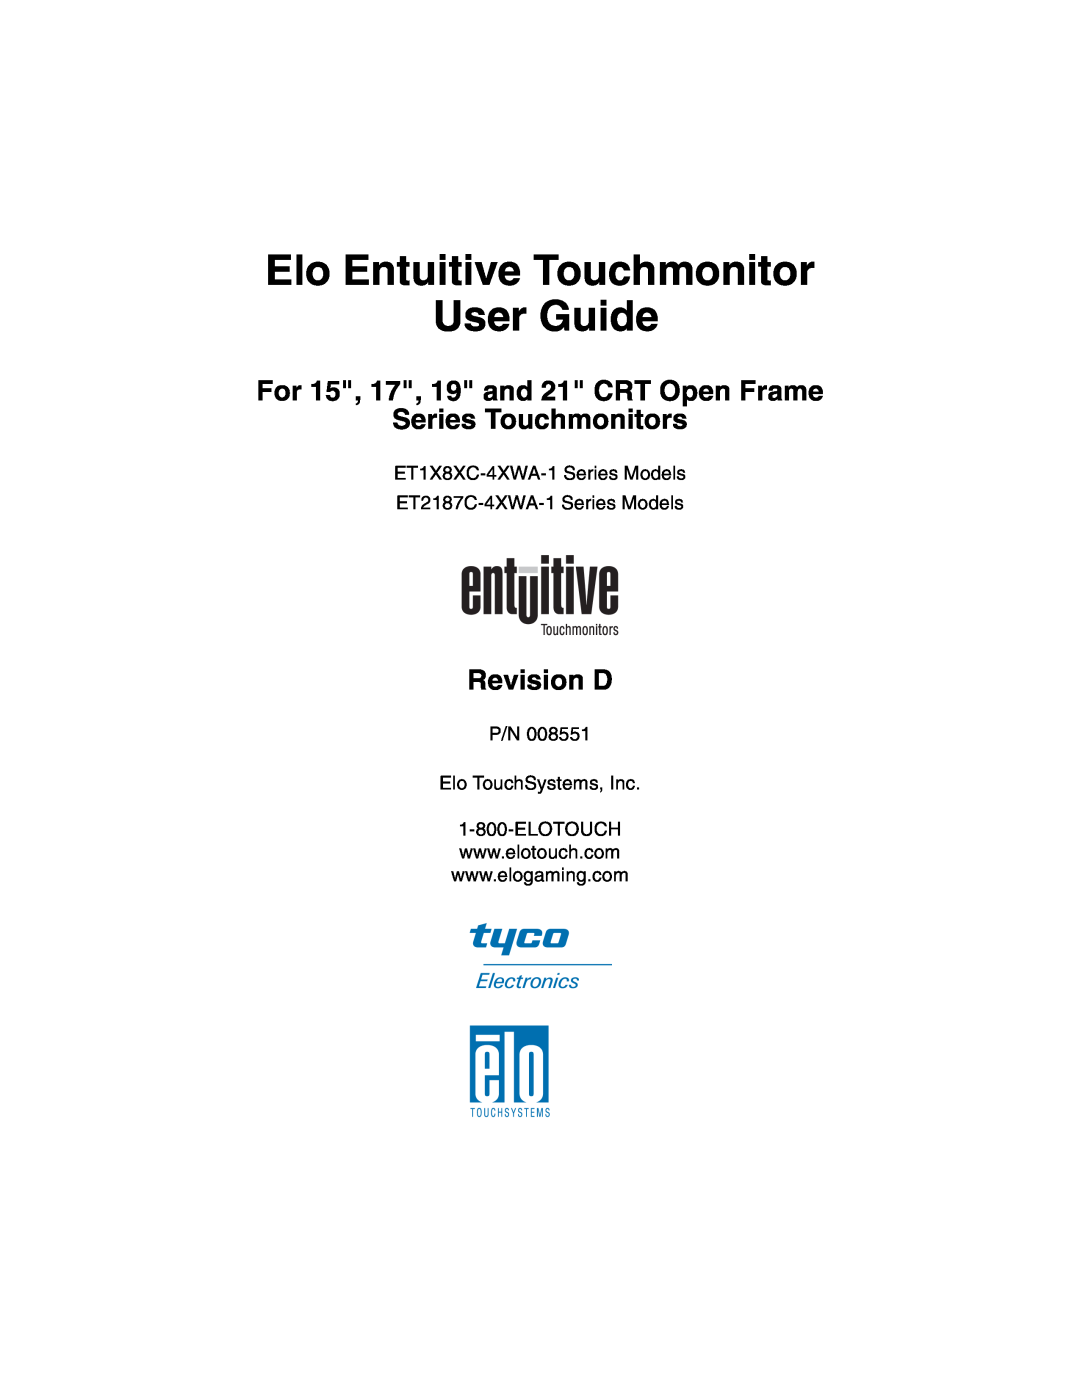 Elo TouchSystems ET2187C-4XWA-1 manual Elo Entuitive Touchmonitor User Guide, Revision D, P/N Elo TouchSystems, Inc 